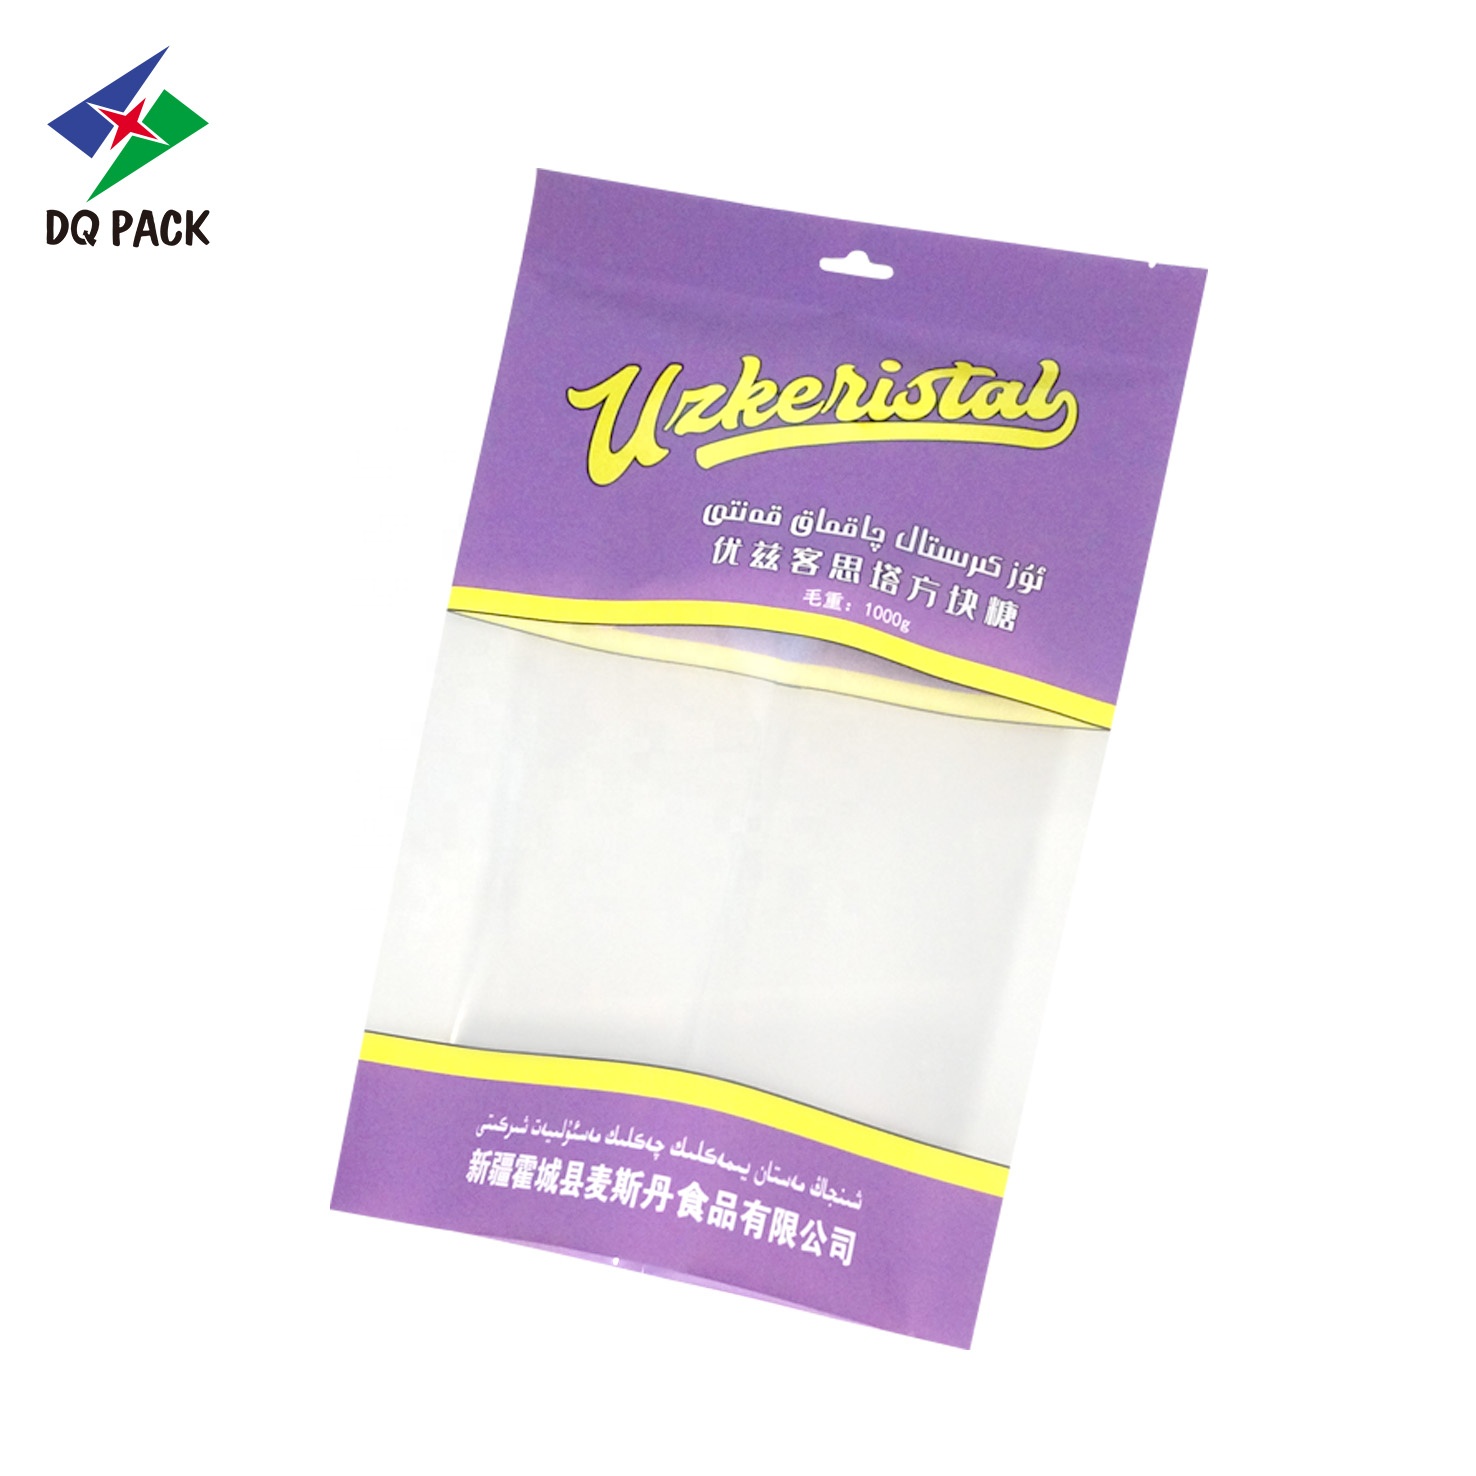 DQ PACK High Transparency Sugar Poly Bag China Food Packaging Suppliers